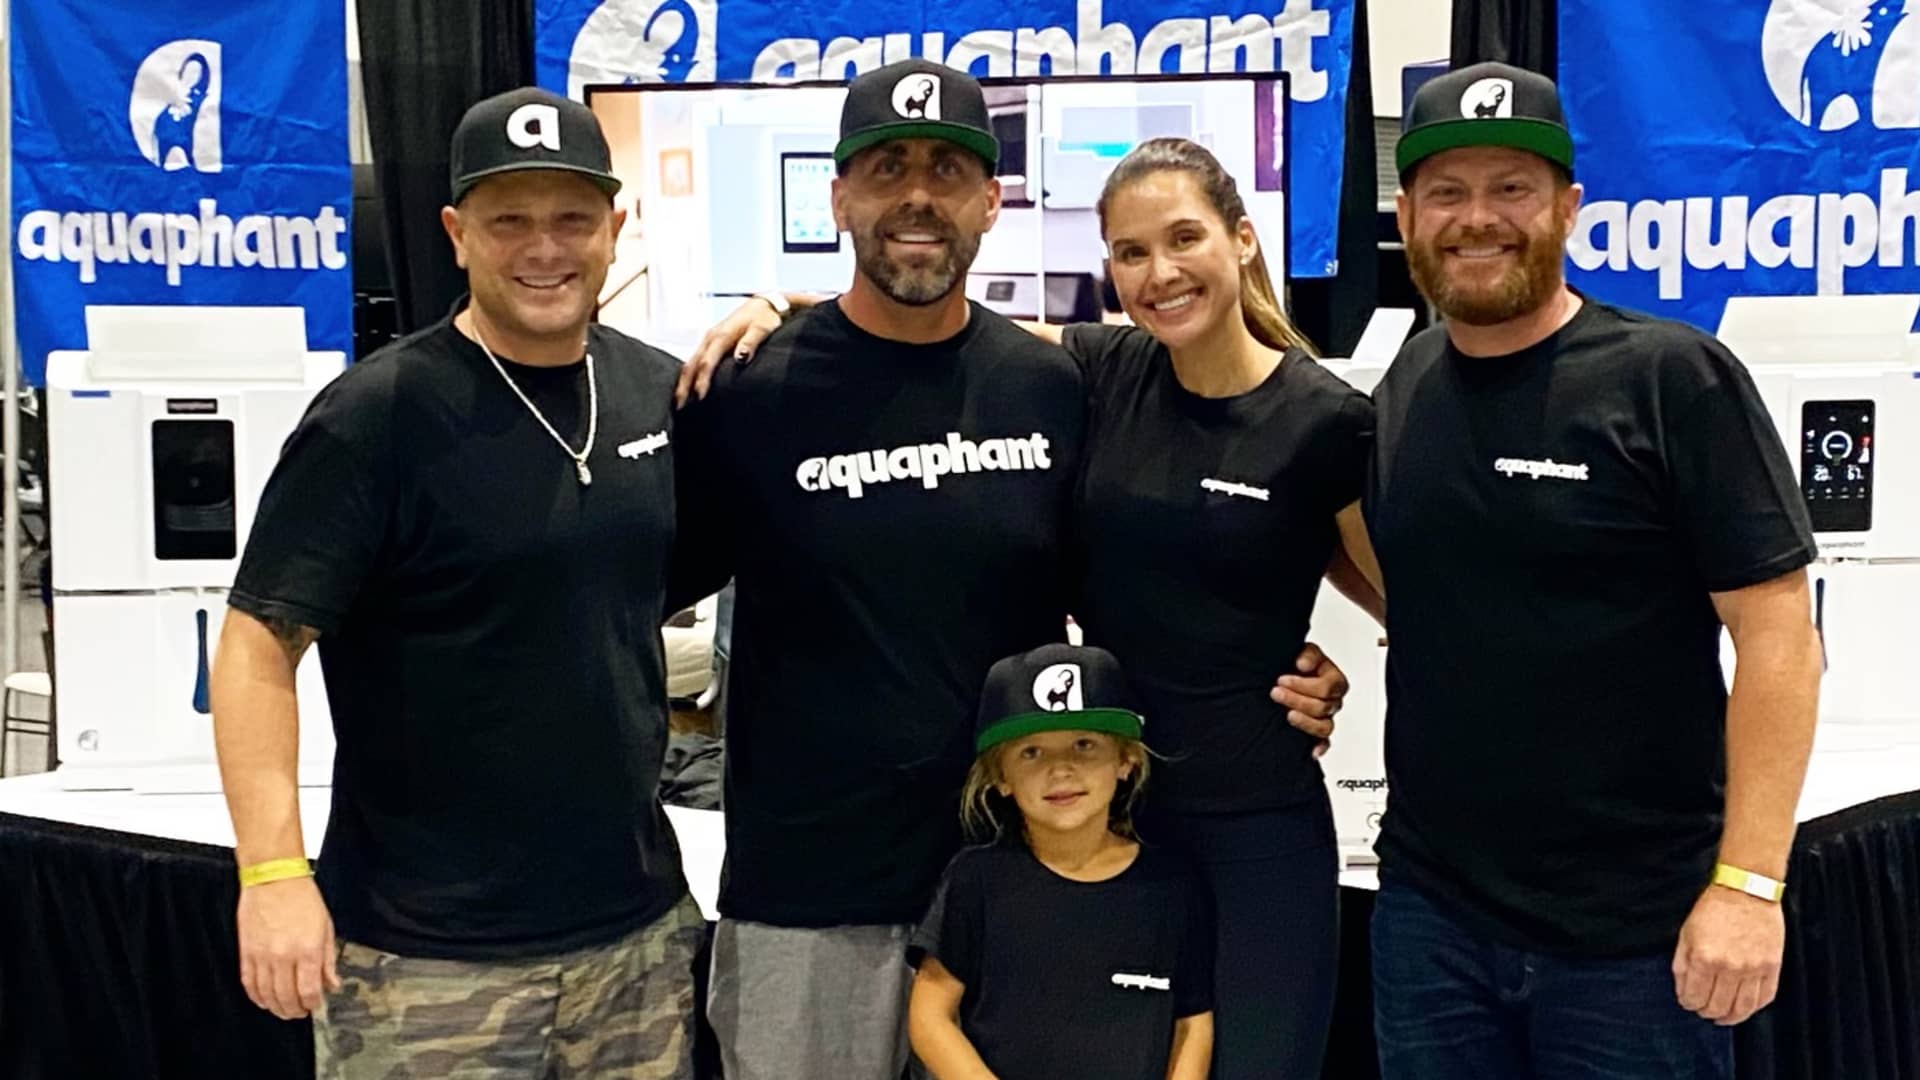 Cody Mullenaux, the inventor and founder of Aquaphant, a technology company that converts moisture from the air into filtered water, with his team and family.